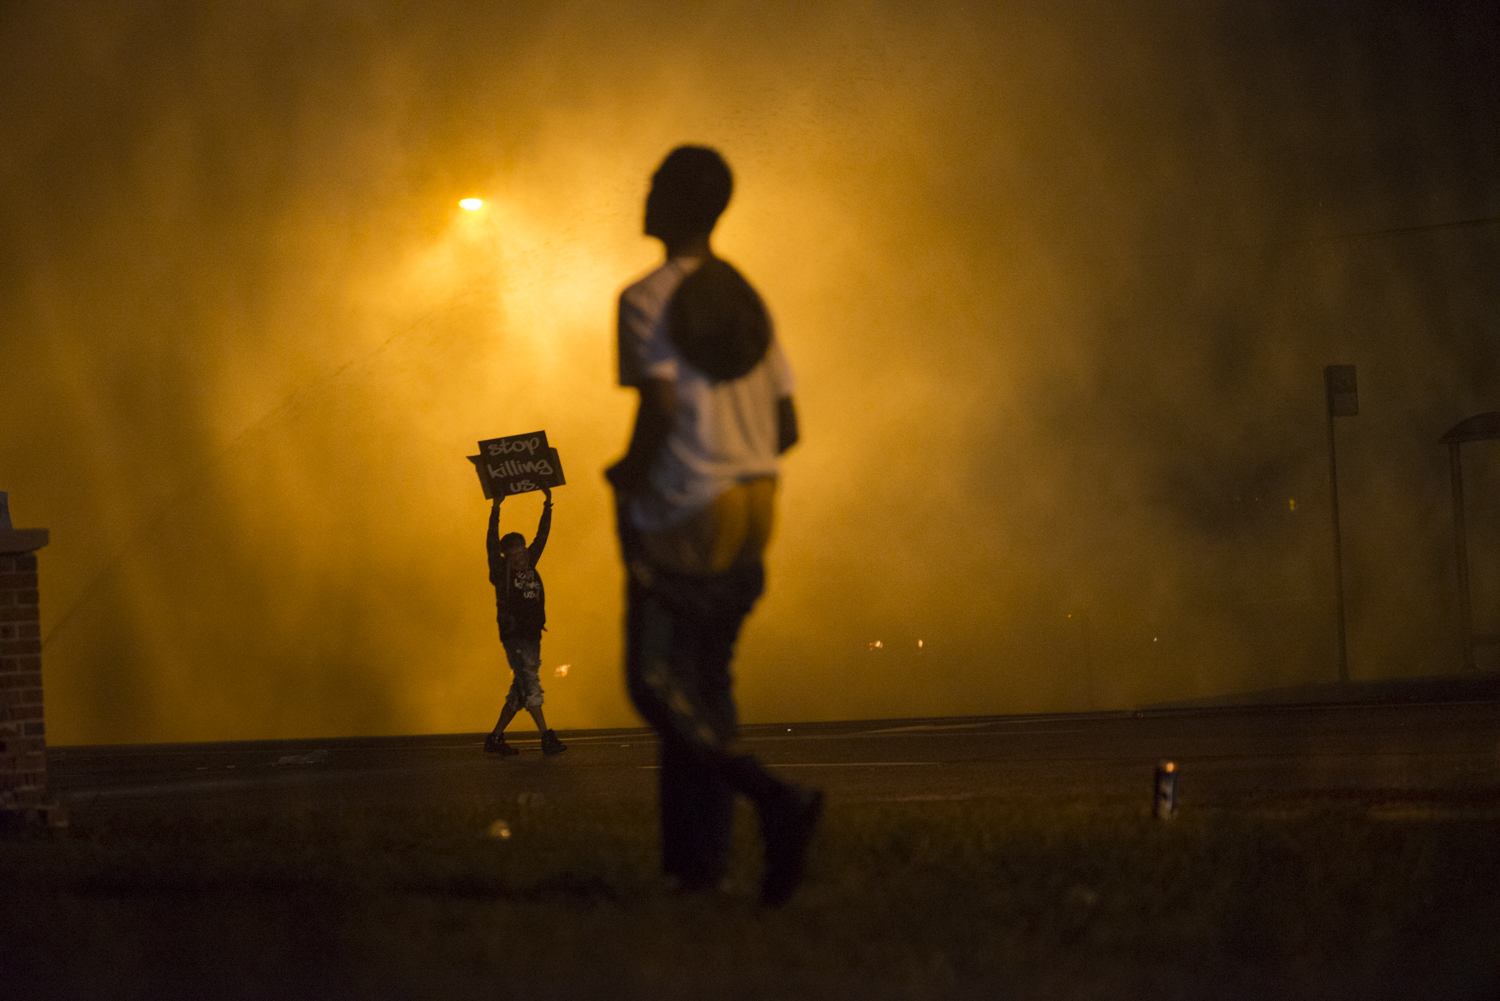 A protestor holds a sign that reads "stop killing us" amid clouds of tear gas in Ferguson, Mo. on Aug. 17, 2014. (Jon Lowenstein—Noor for TIME)